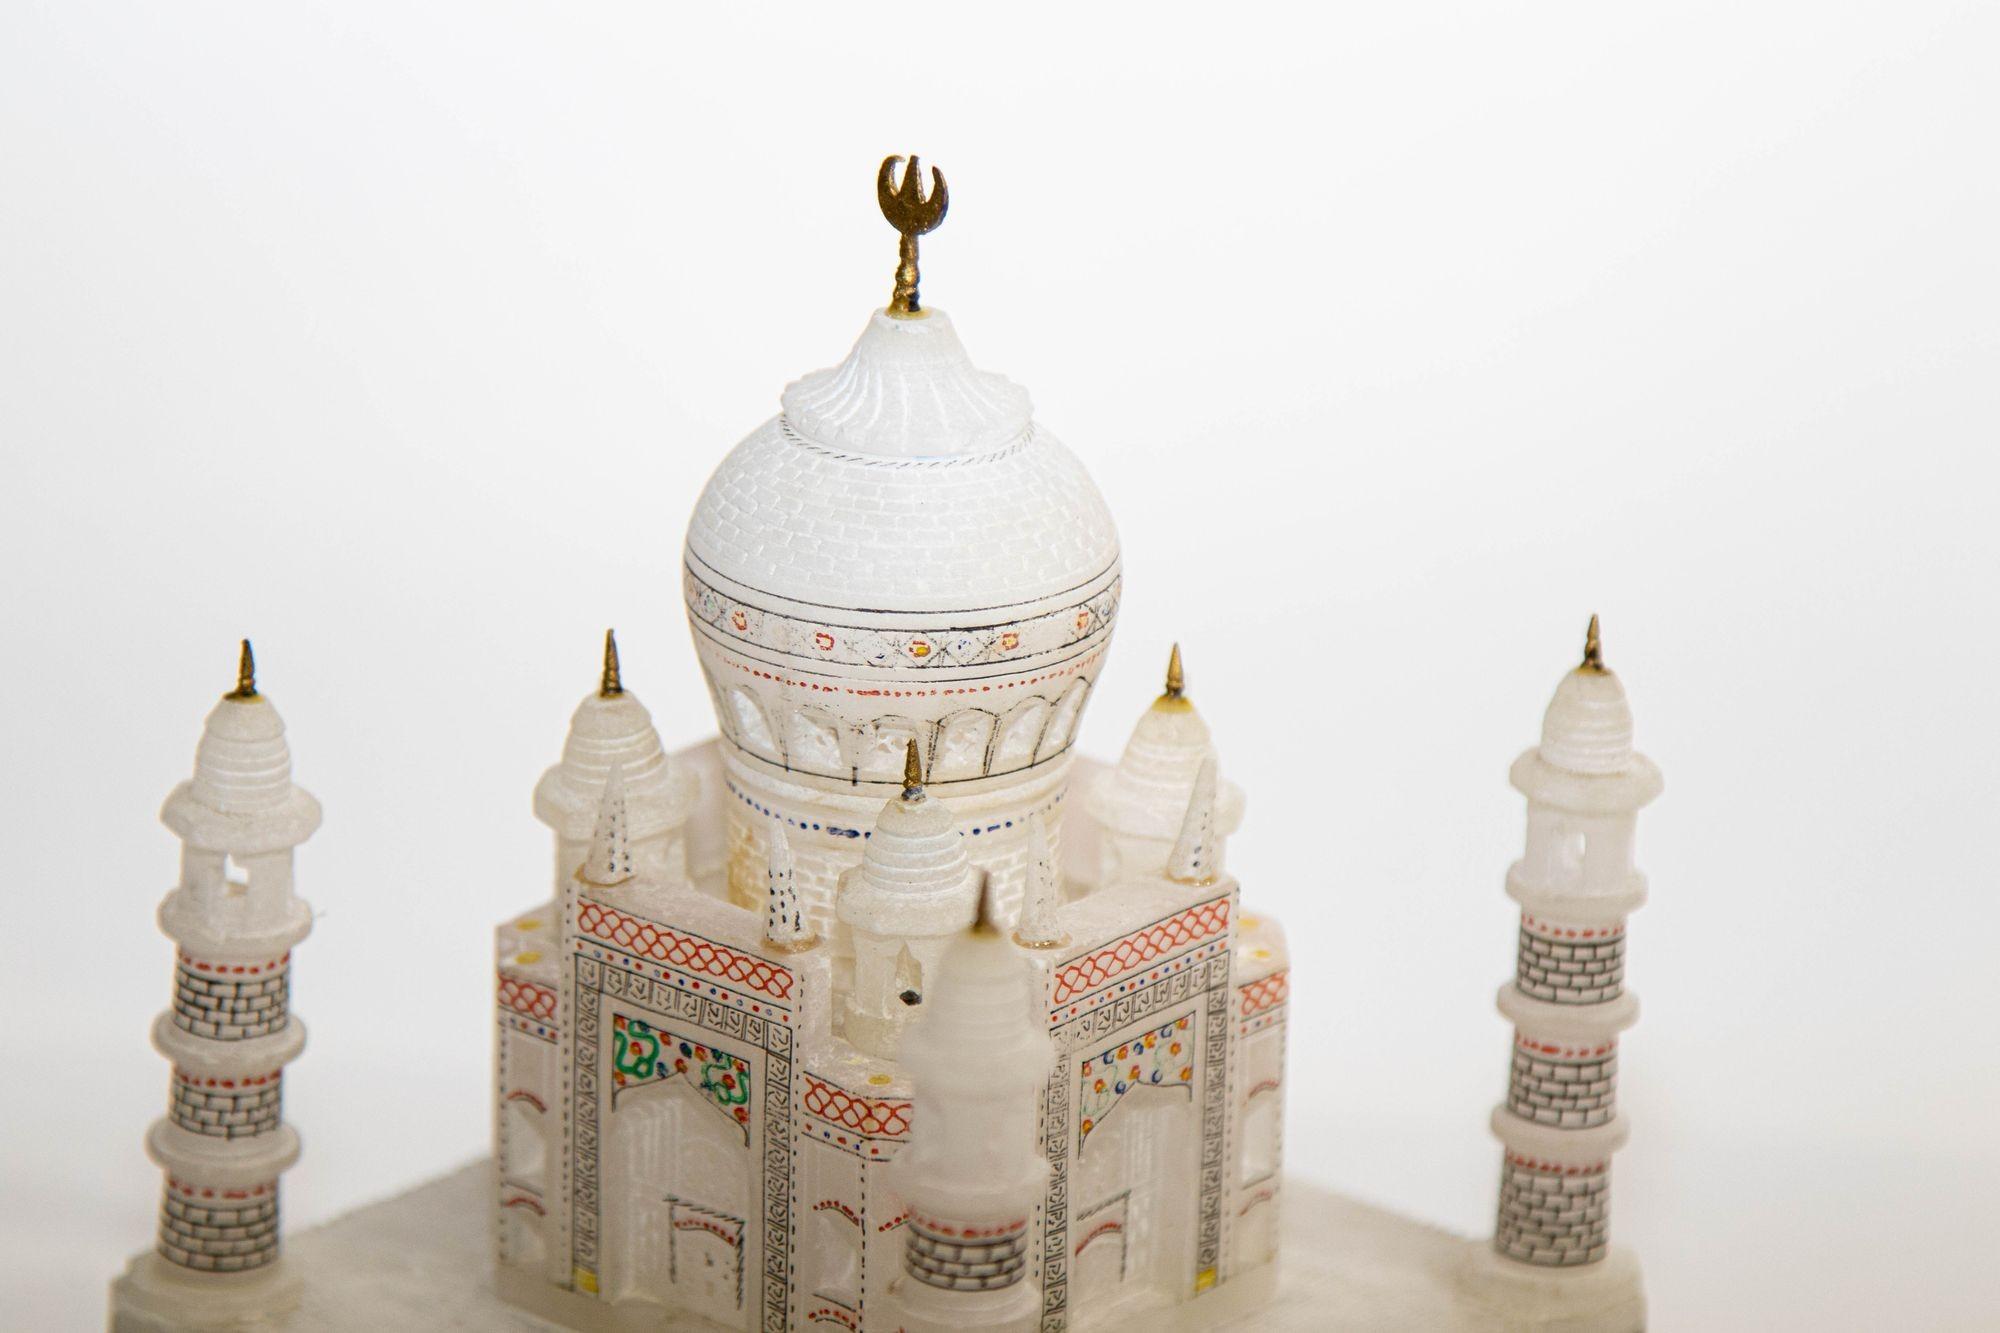 Moorish Taj Mahal White Marble Hand-Crafted Collectible Miniature Model For Sale